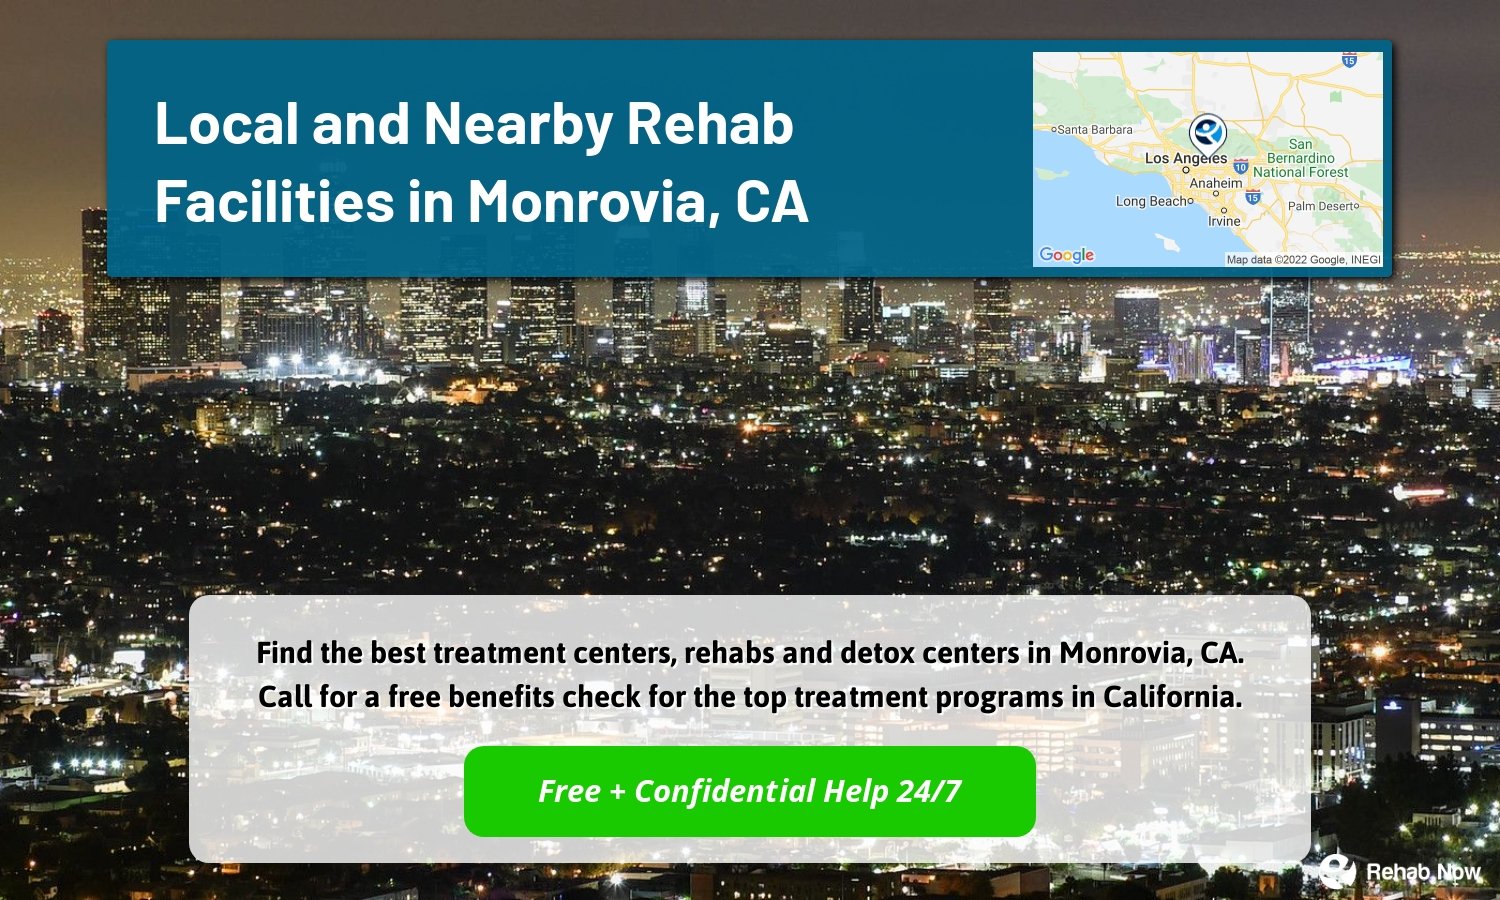 Find the best treatment centers, rehabs and detox centers in Monrovia, CA. Call for a free benefits check for the top treatment programs in California.